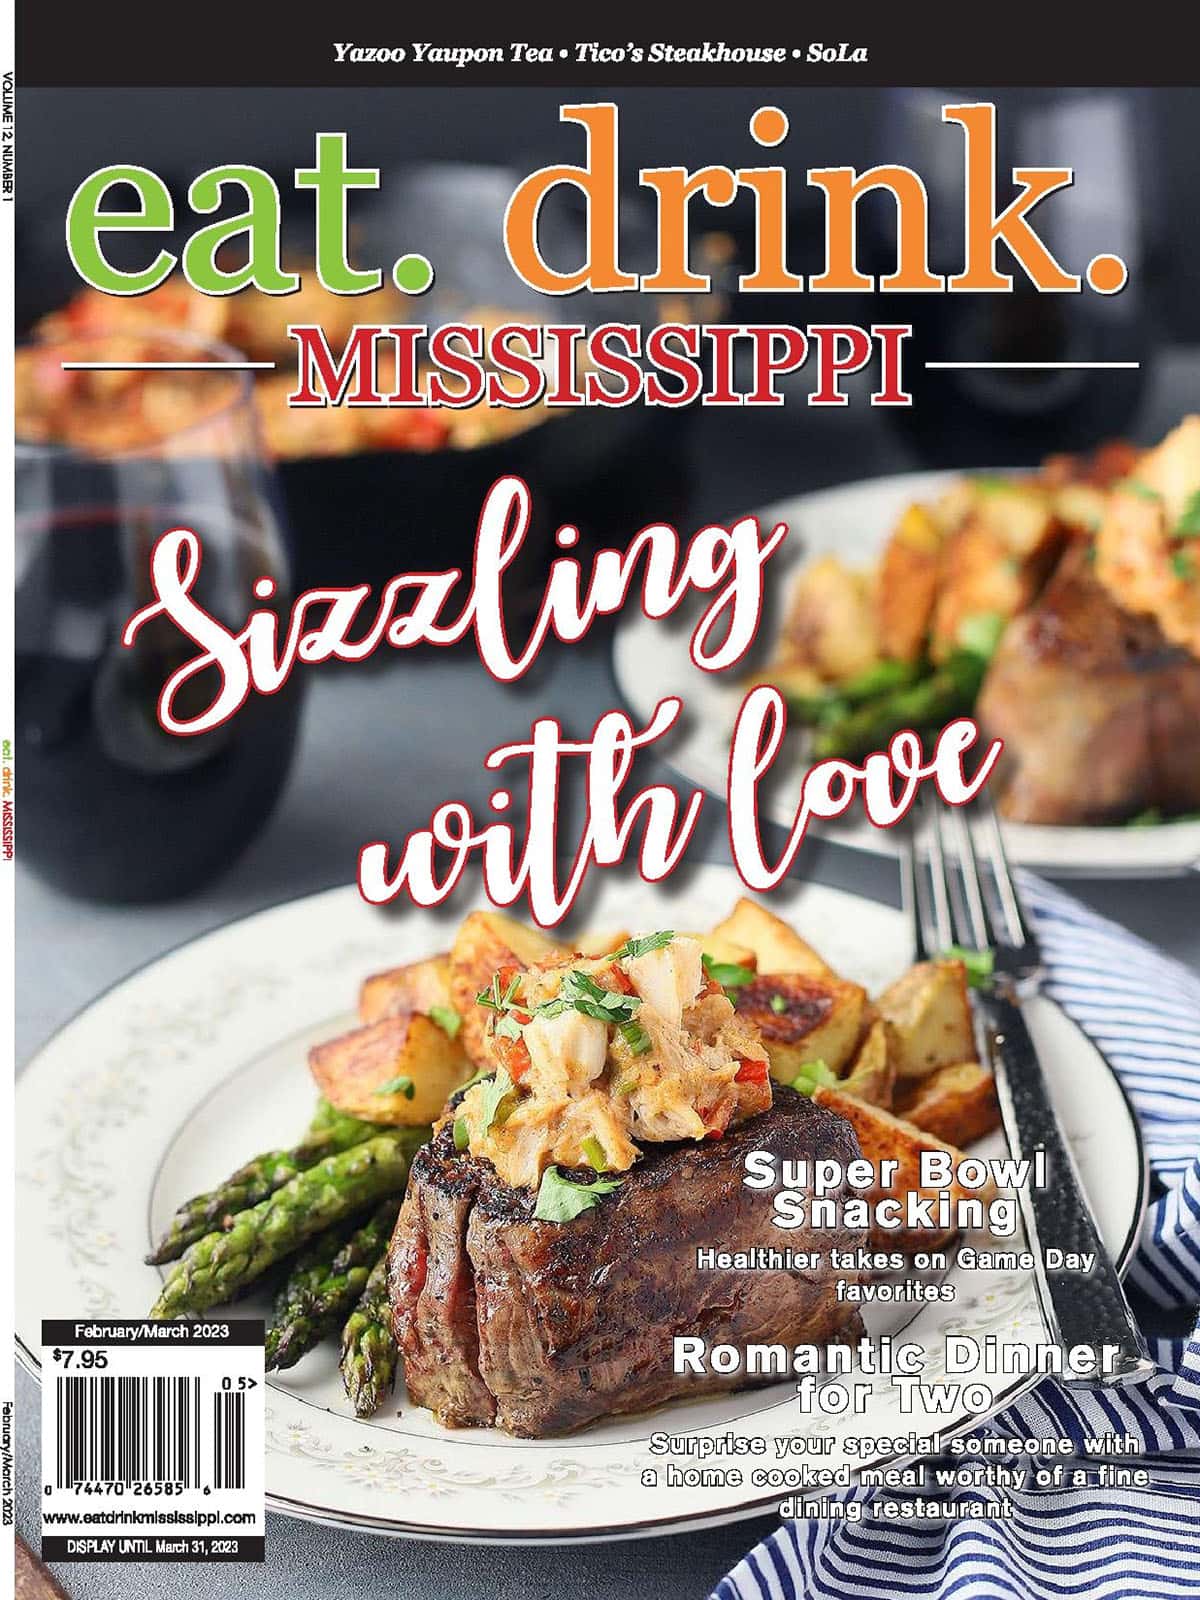 cover of February 2023 issue of eat.drink.MISSISSIPPi cover photo taken by Mississippi food blogger Lisa L. Bynum